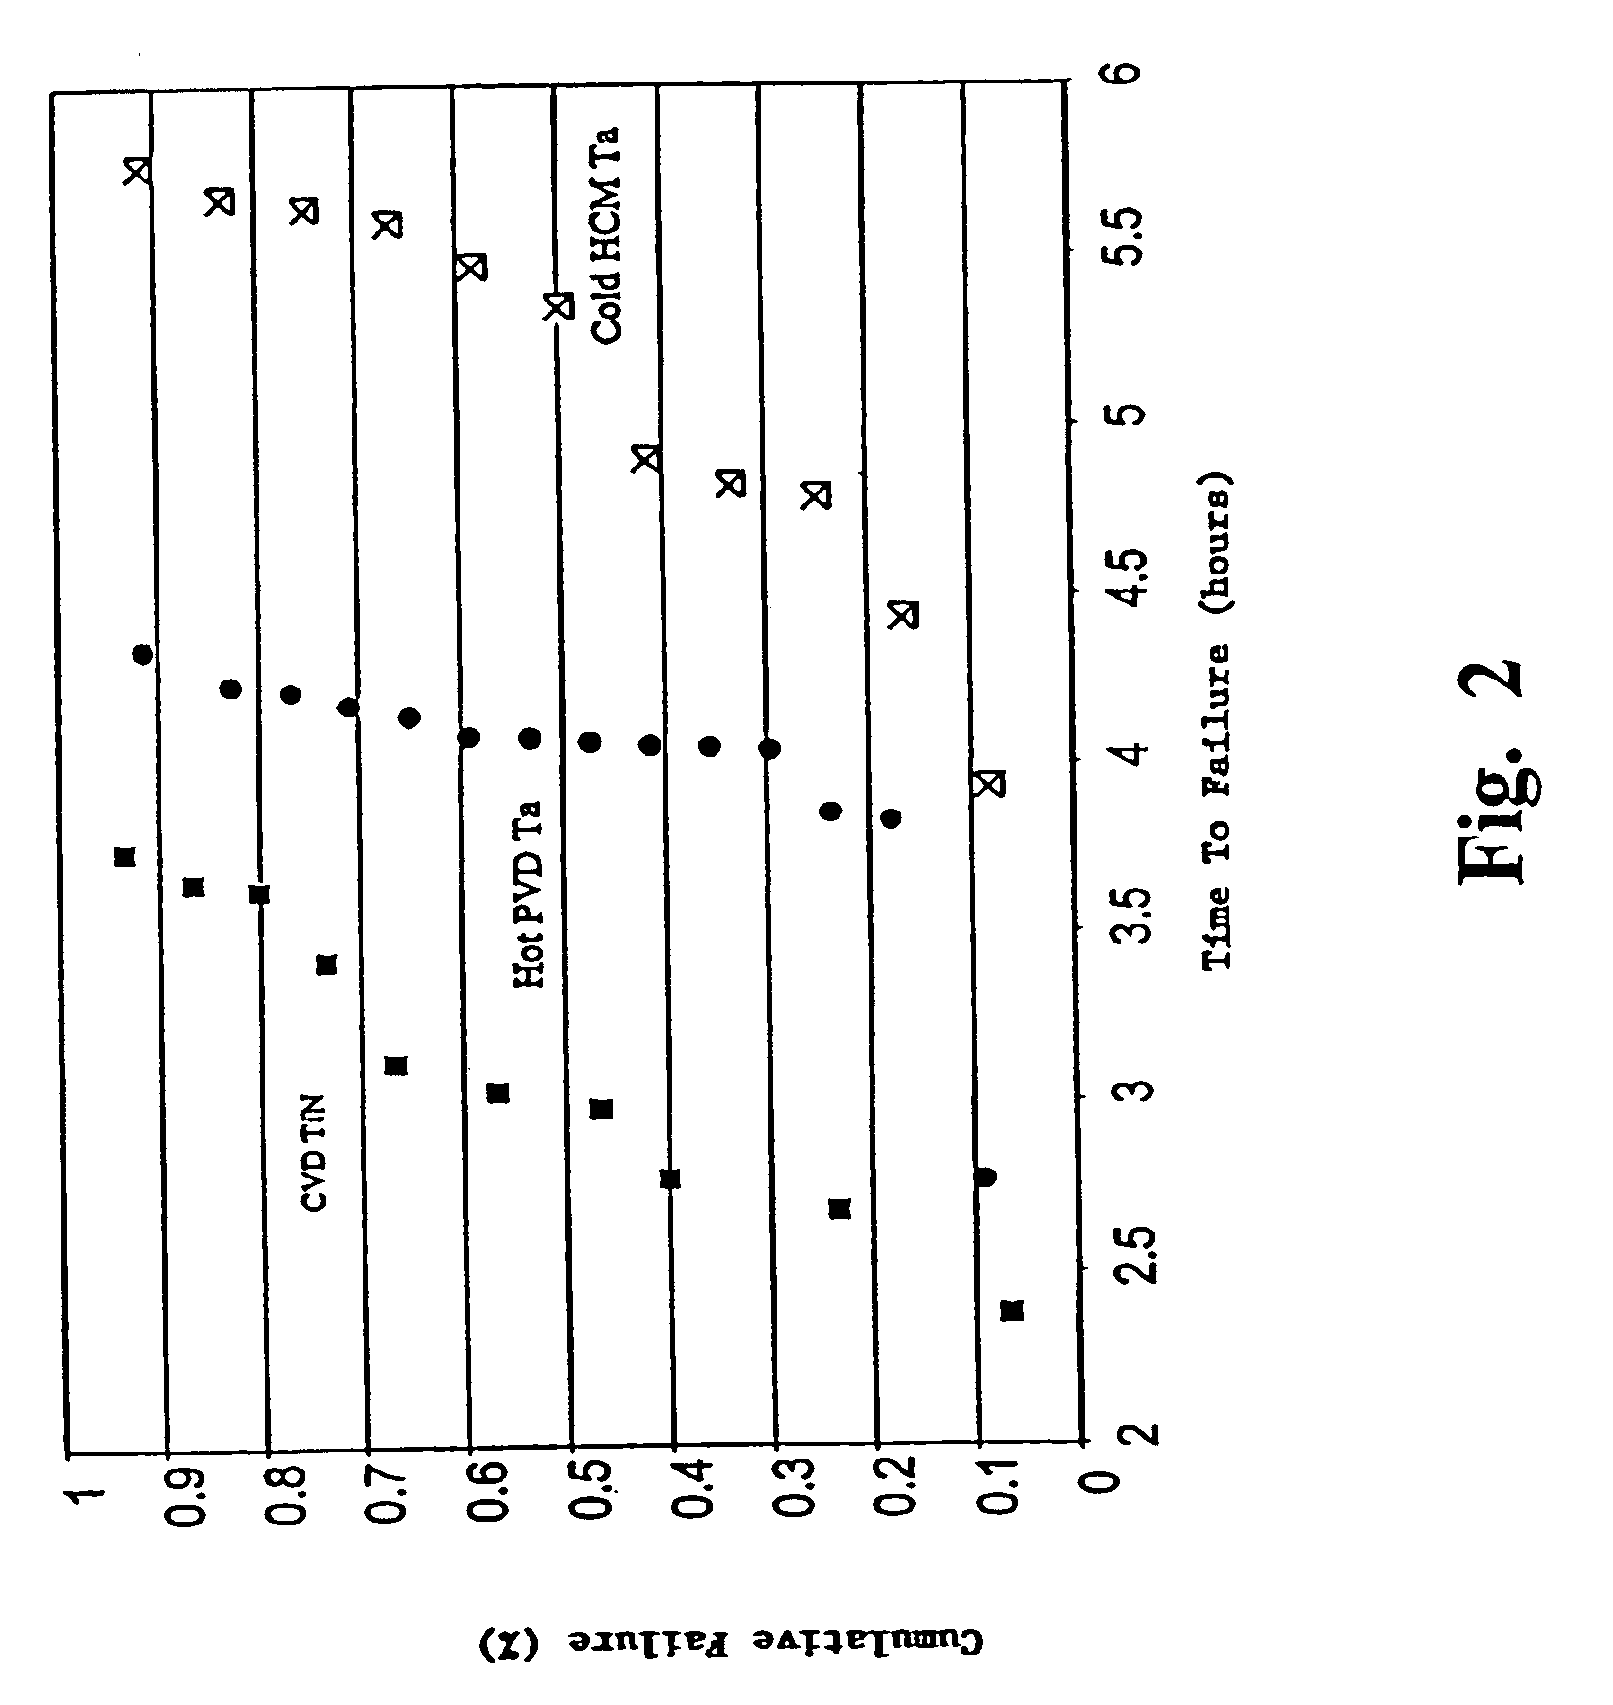 Apparatus and method for depositing superior Ta (N) copper thin films for barrier and seed applications in semiconductor processing